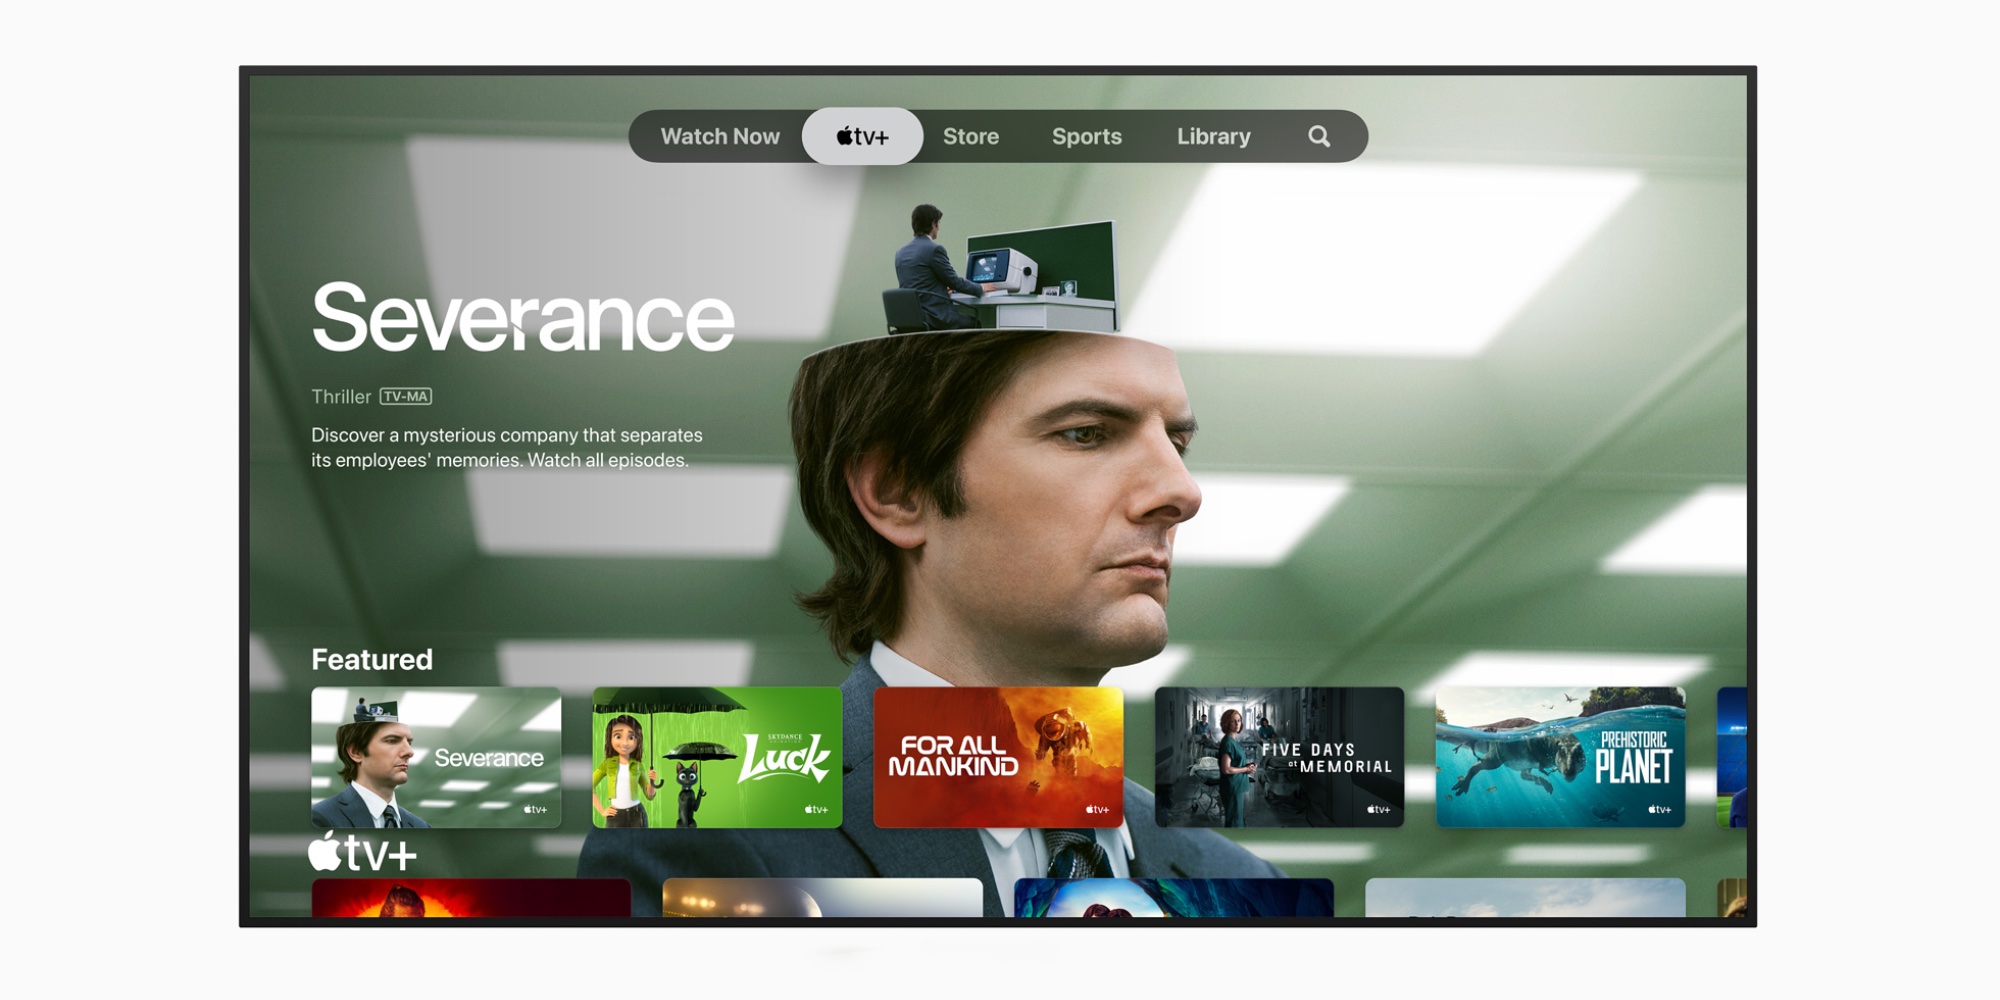 Apple updates TV app on Samsung smart TVs to support HDR10+ content